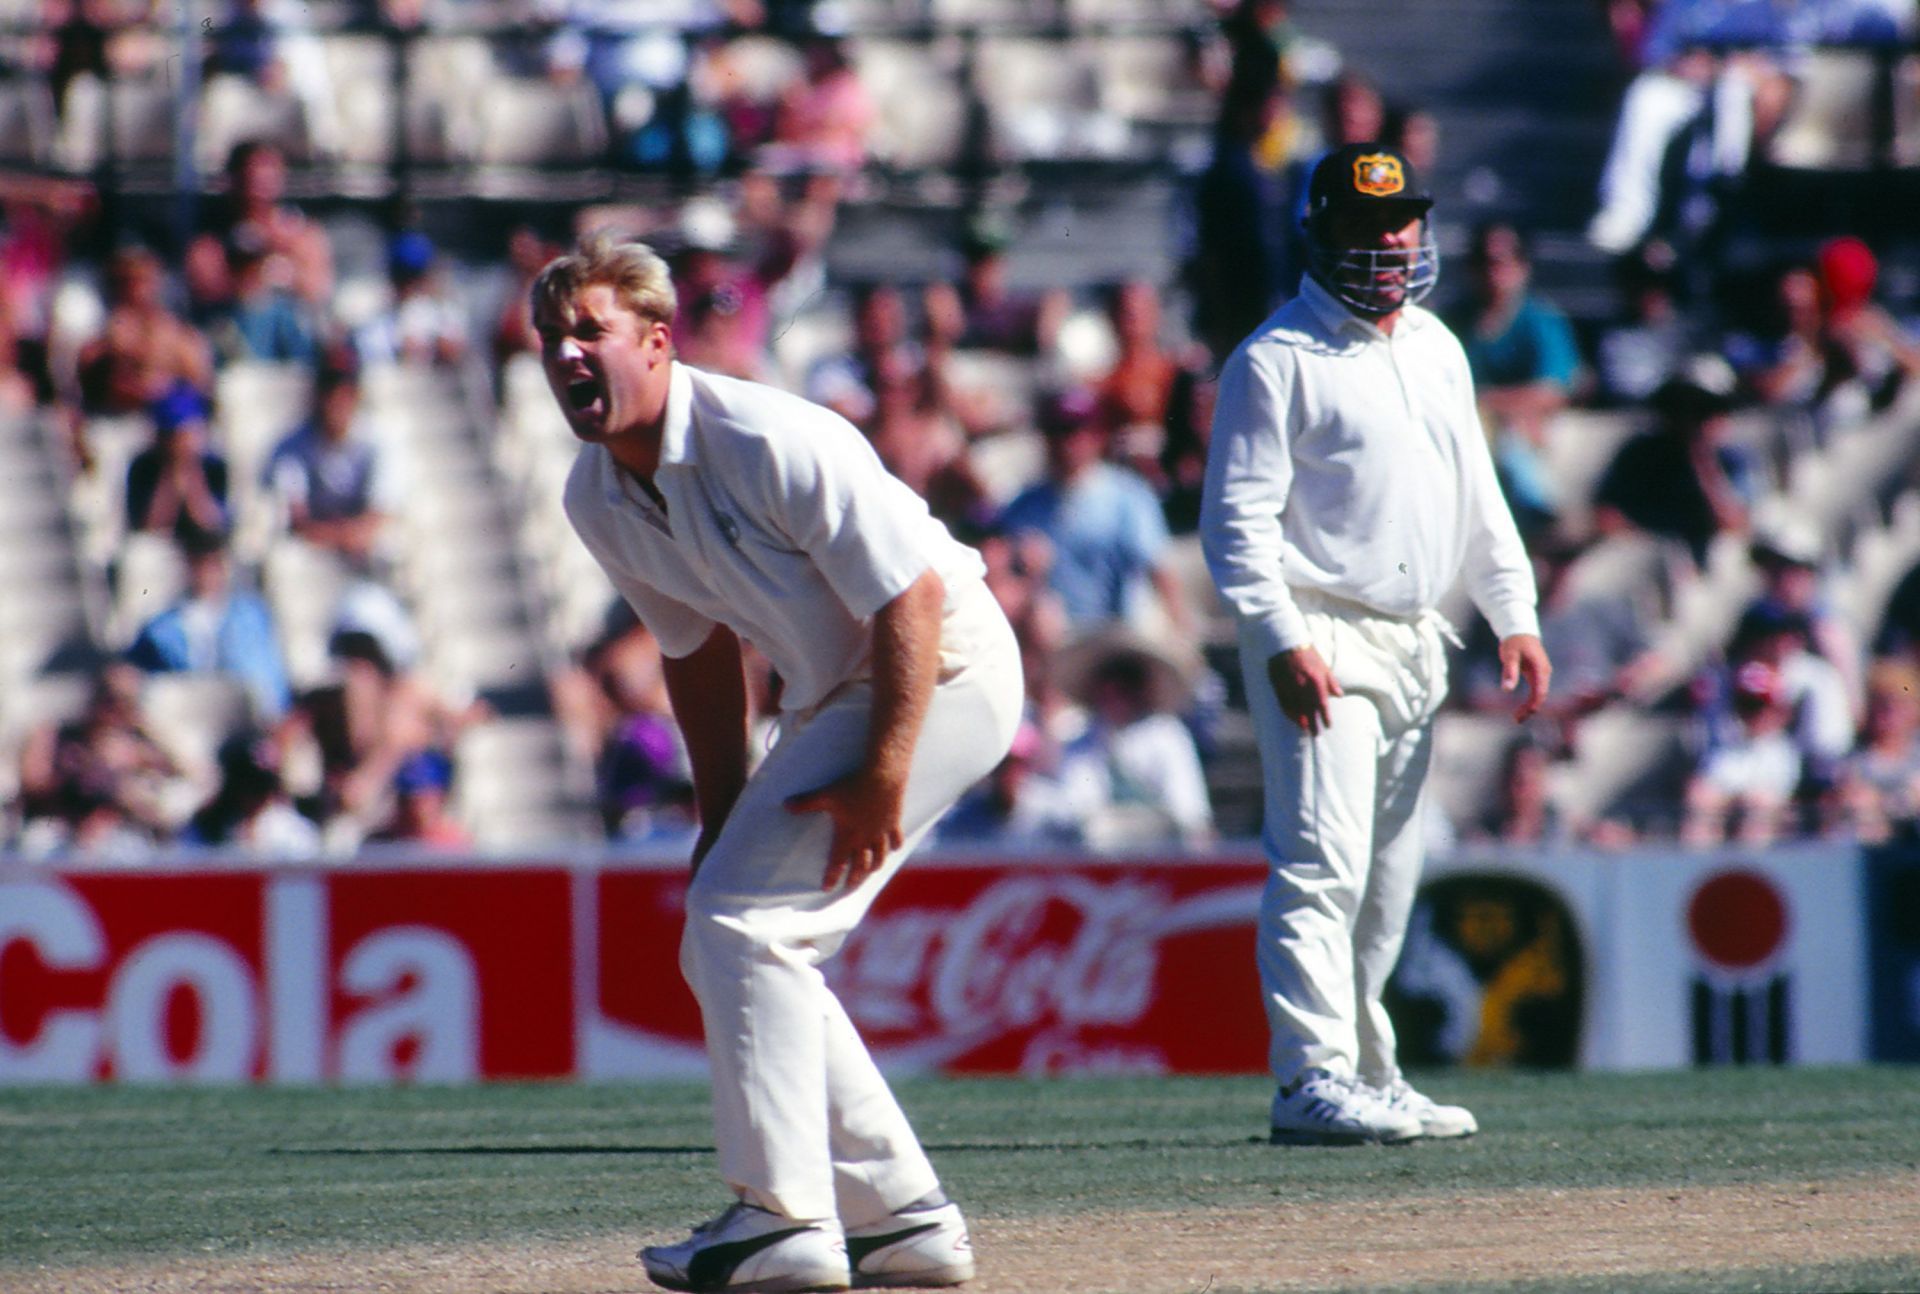 Shane Warne produced magic in the Ashes. (Pic: Getty Images)